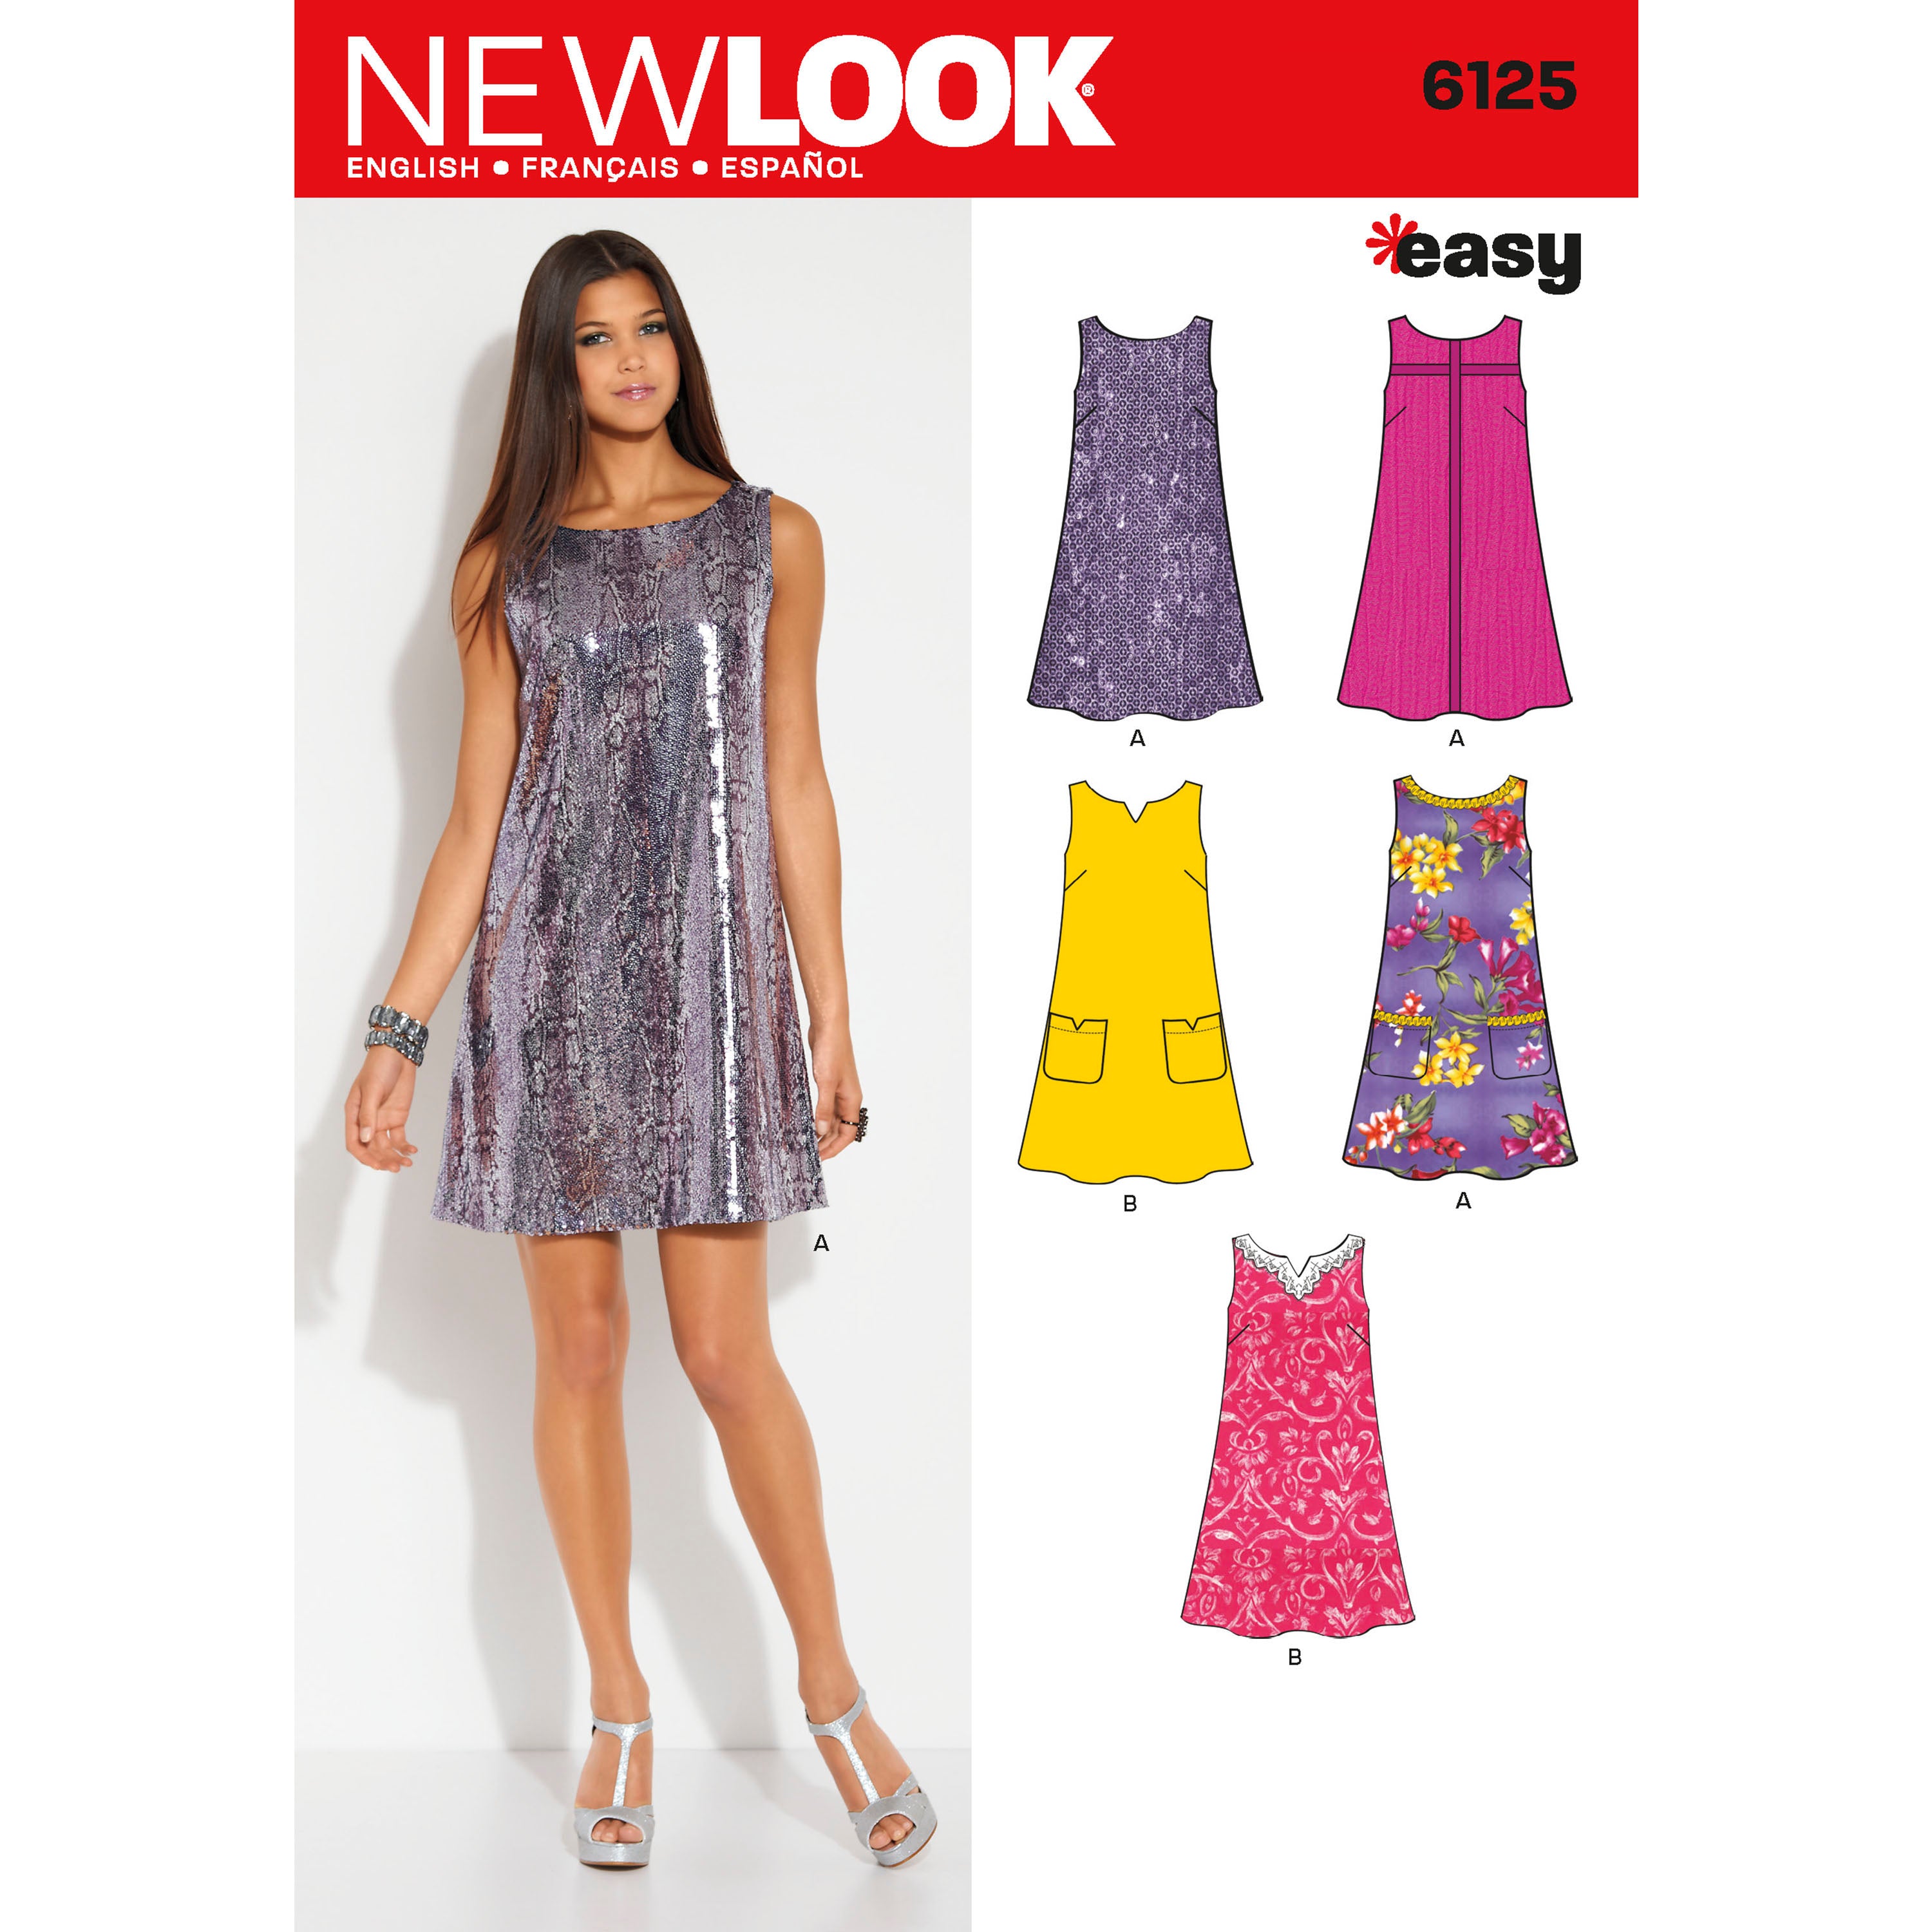 New Look Sewing Pattern 6469 Misses' Easy Knit Dress - Knitwit